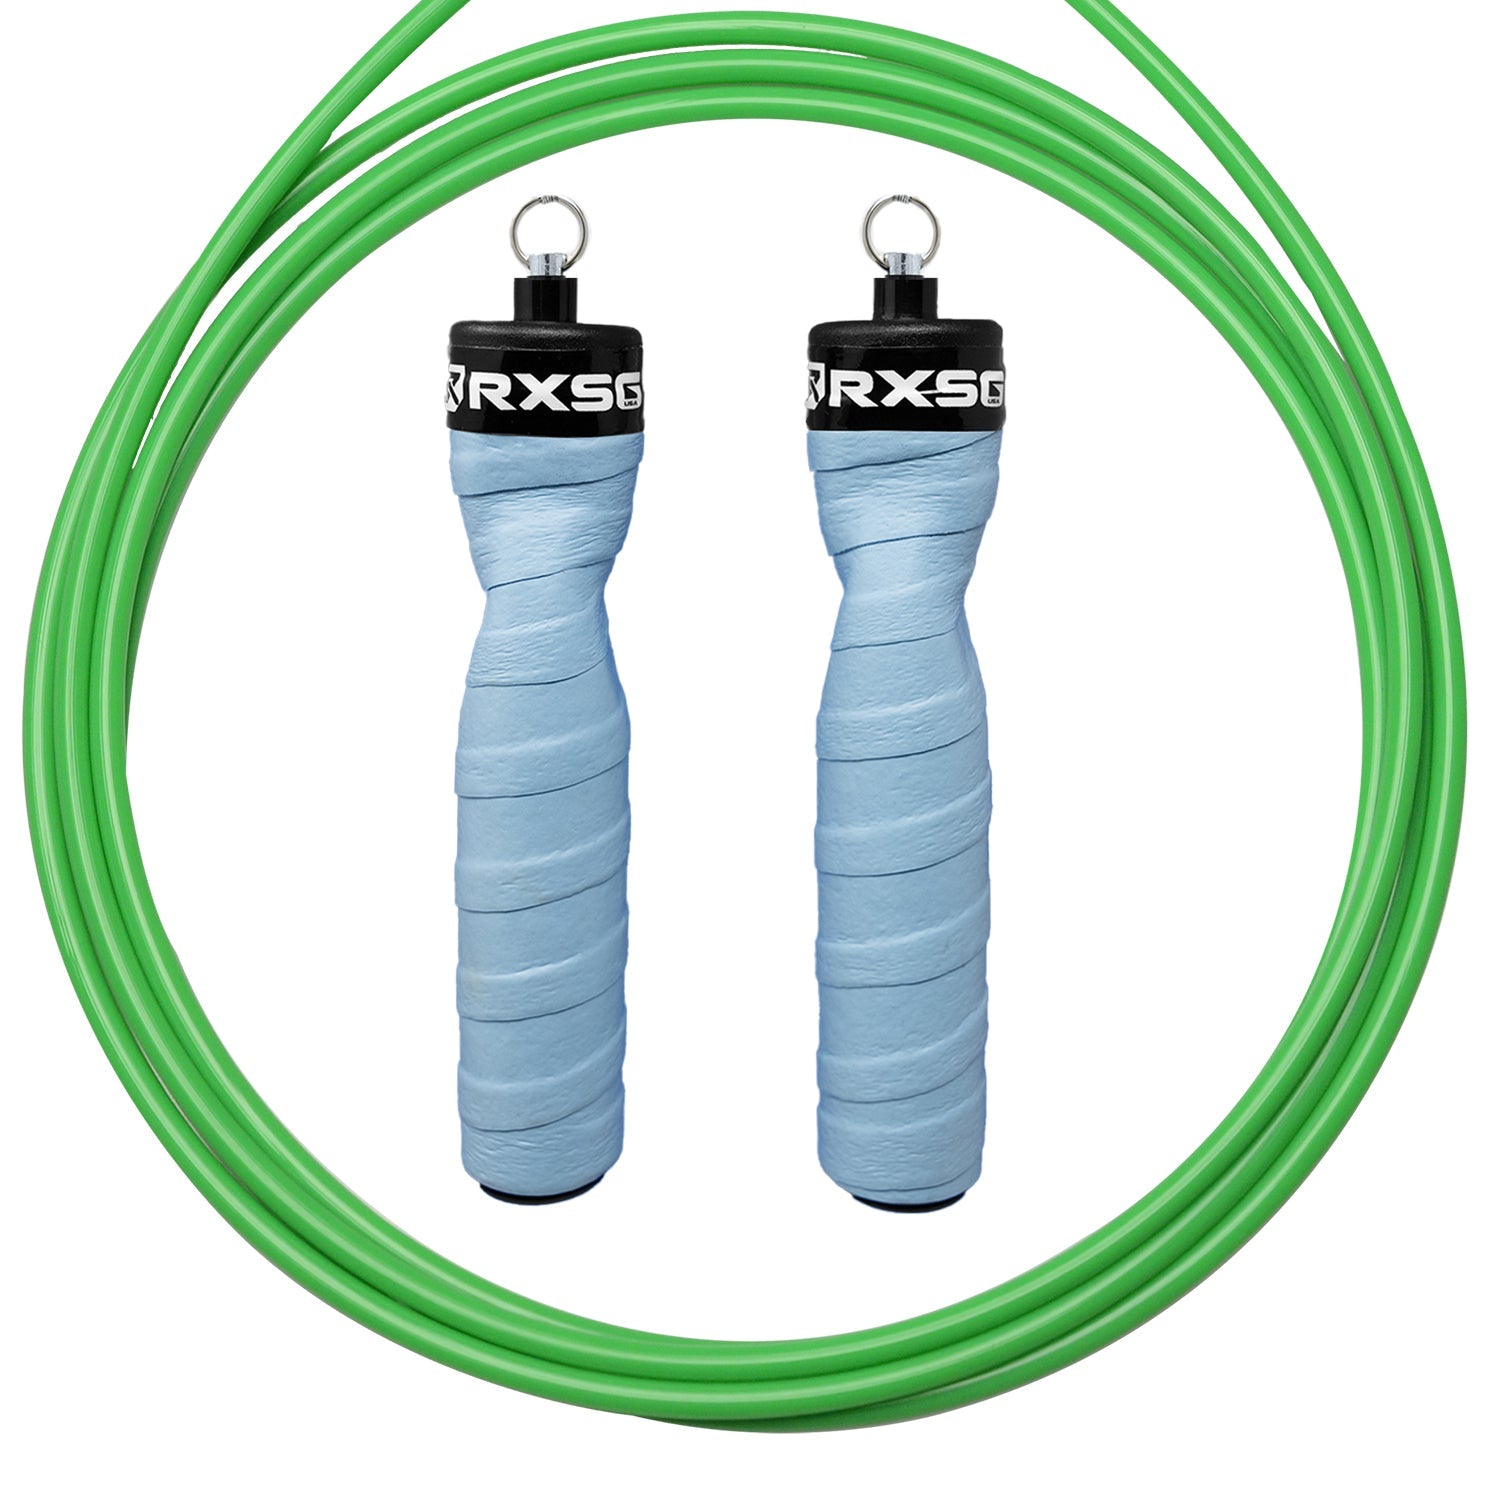 CustomFit Skye Jump Rope with green cable